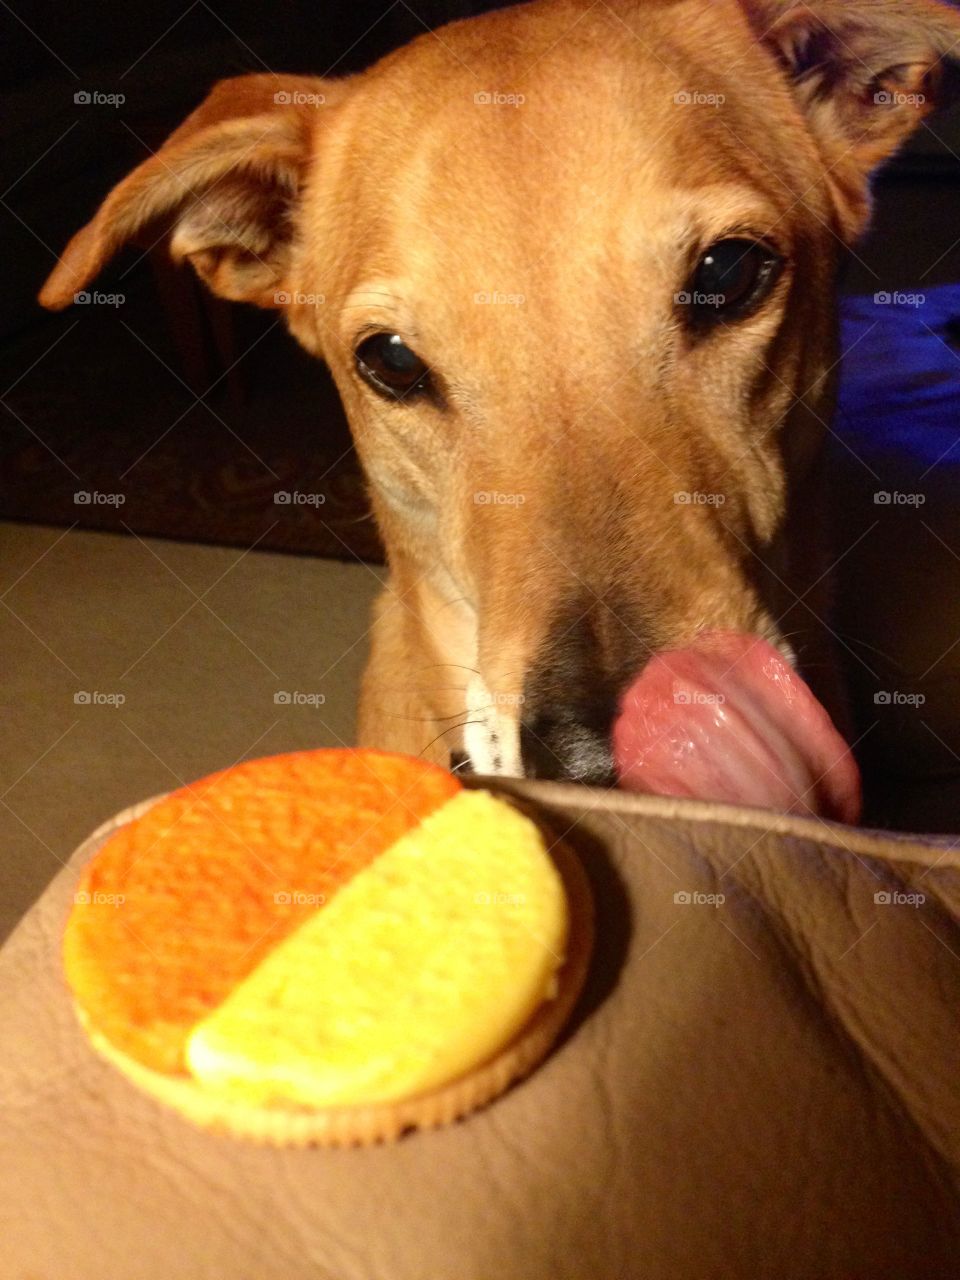 Dog looking at cookie and licking lips.